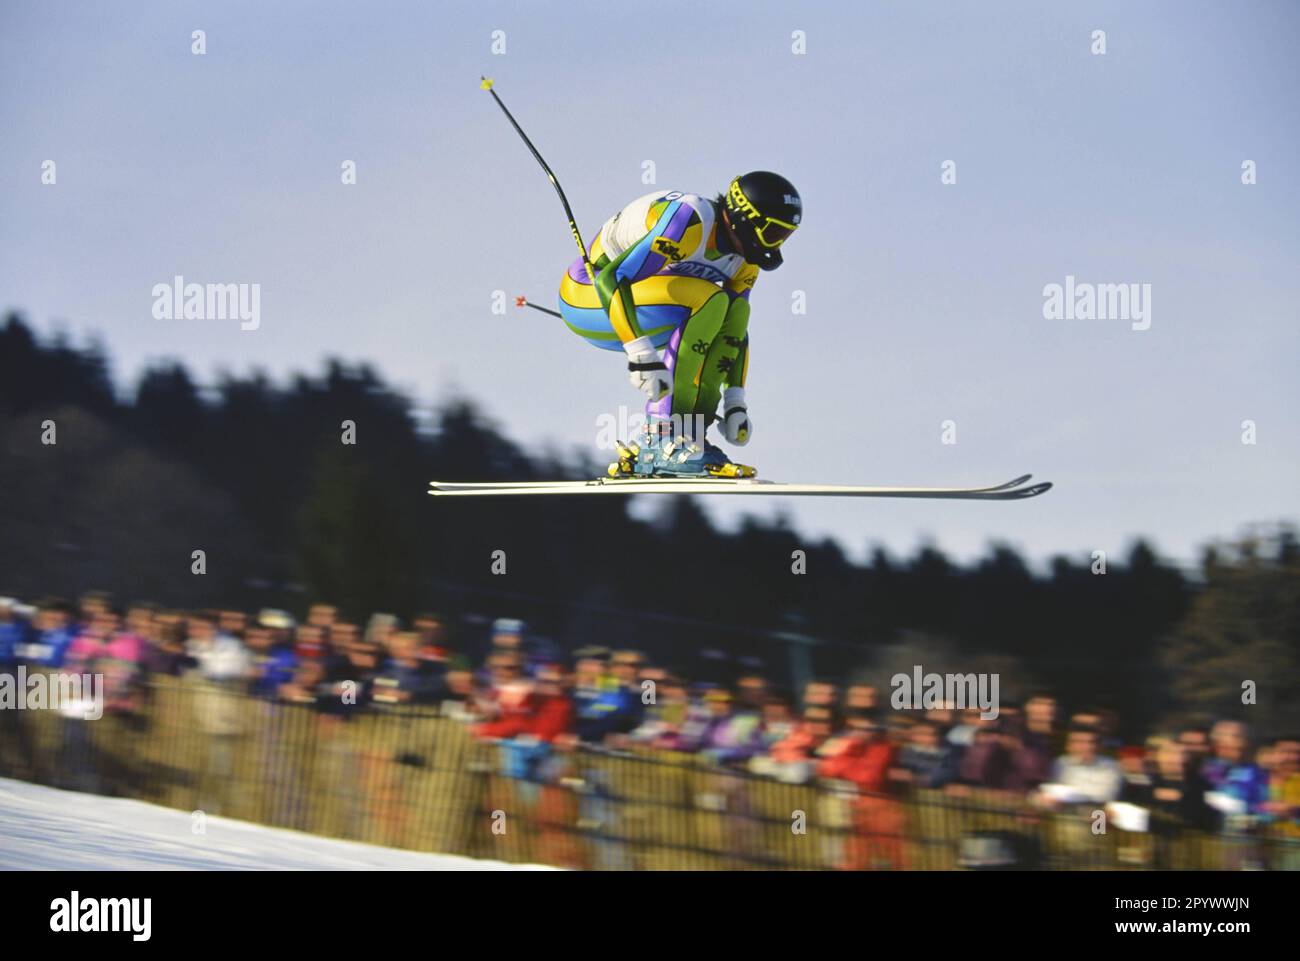 Alpine Skiing World Cup 1991/1992 Kitzbuehel Downhill 18.01.1992 Peter WIRNSBERGER (Austria) PHOTO: WEREK Press Picture Agency xxNOxMODELxRELEASExx [automated translation]- AUSTRIA OUT Stock Photo